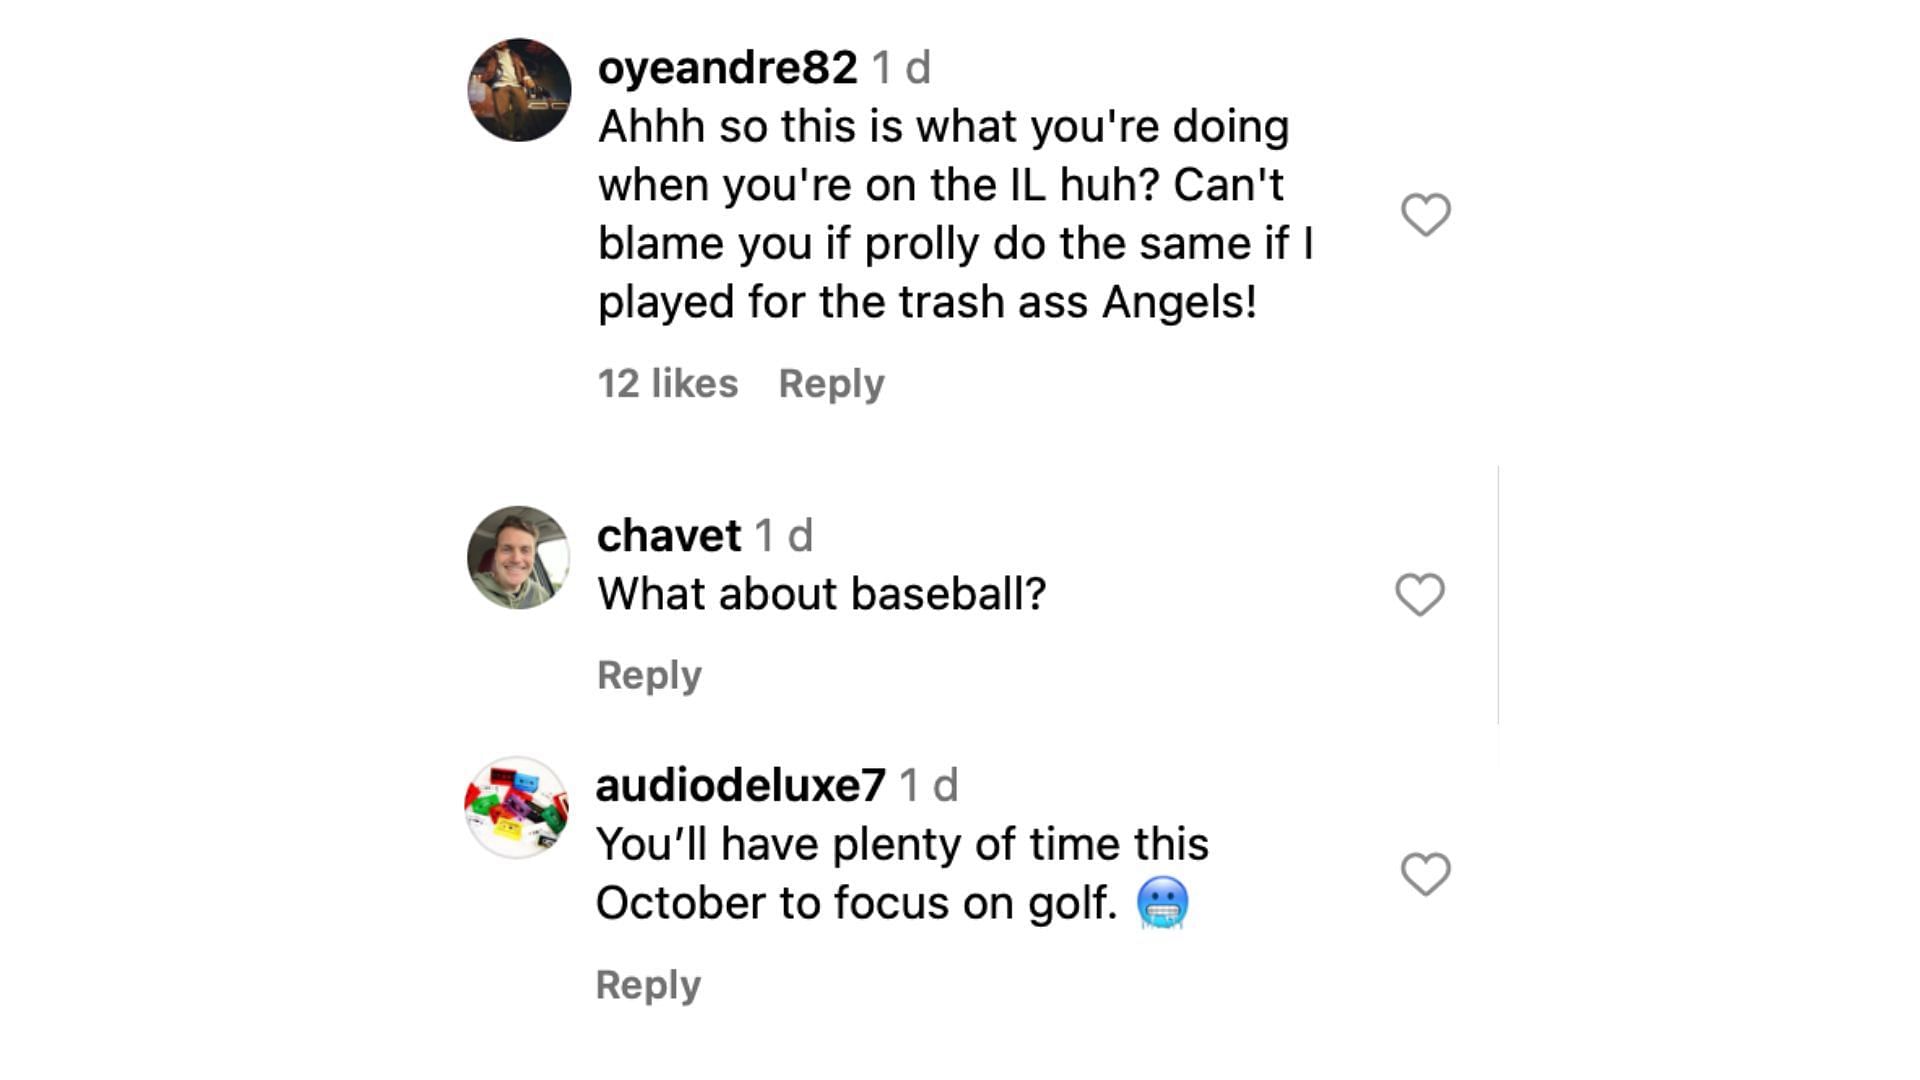 Comments from Instagram